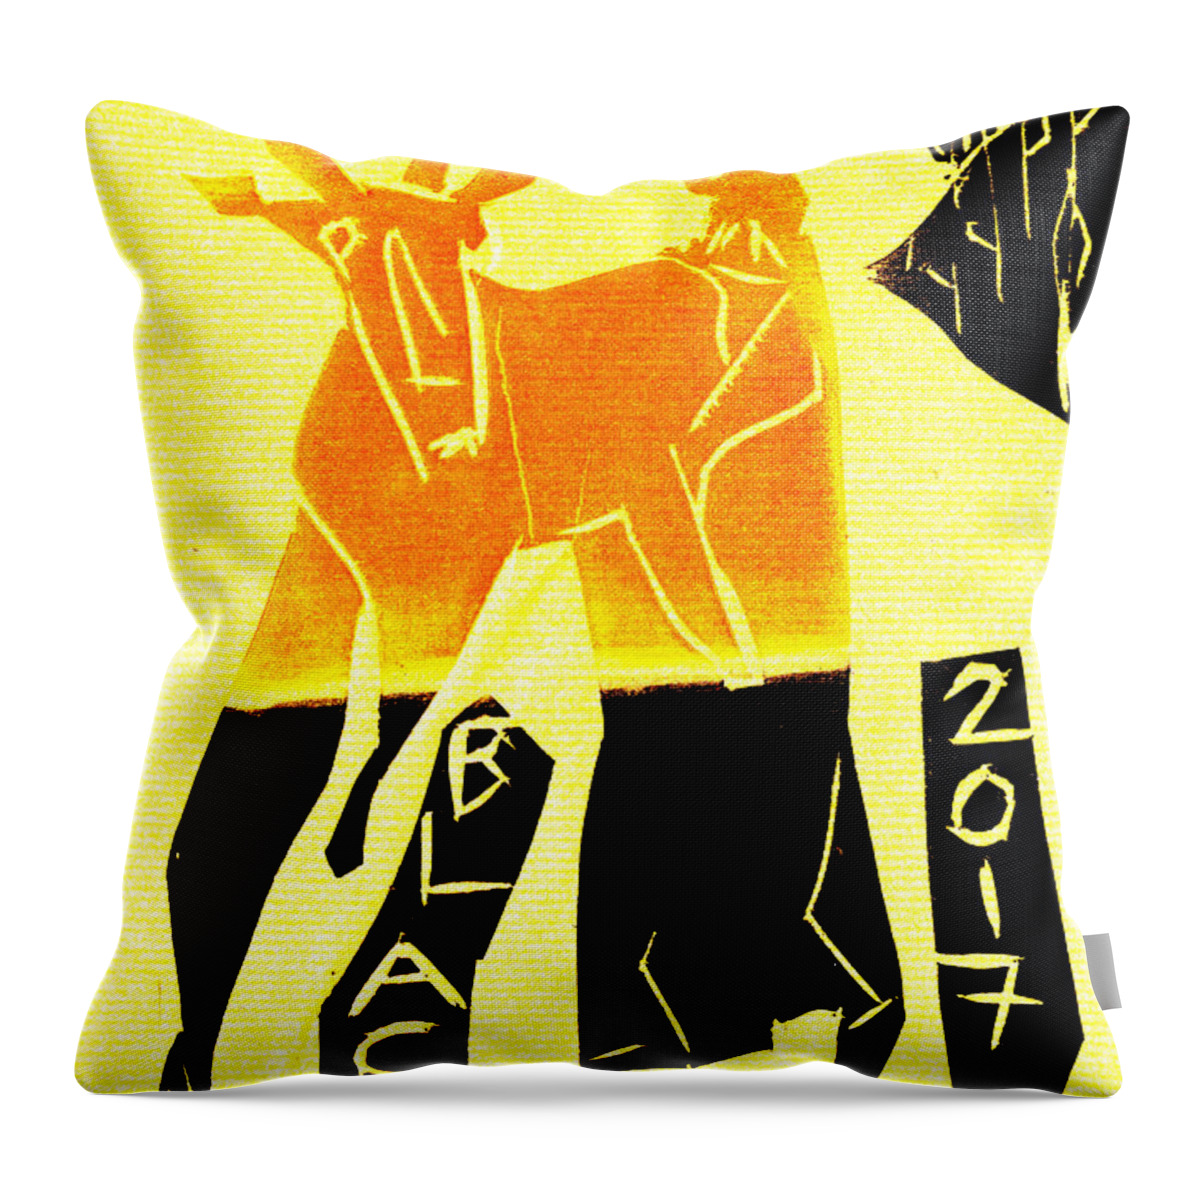 Yellow Throw Pillow featuring the digital art Yellow Antelope Black Ivory Woodcut Poster 15 by Edgeworth Johnstone